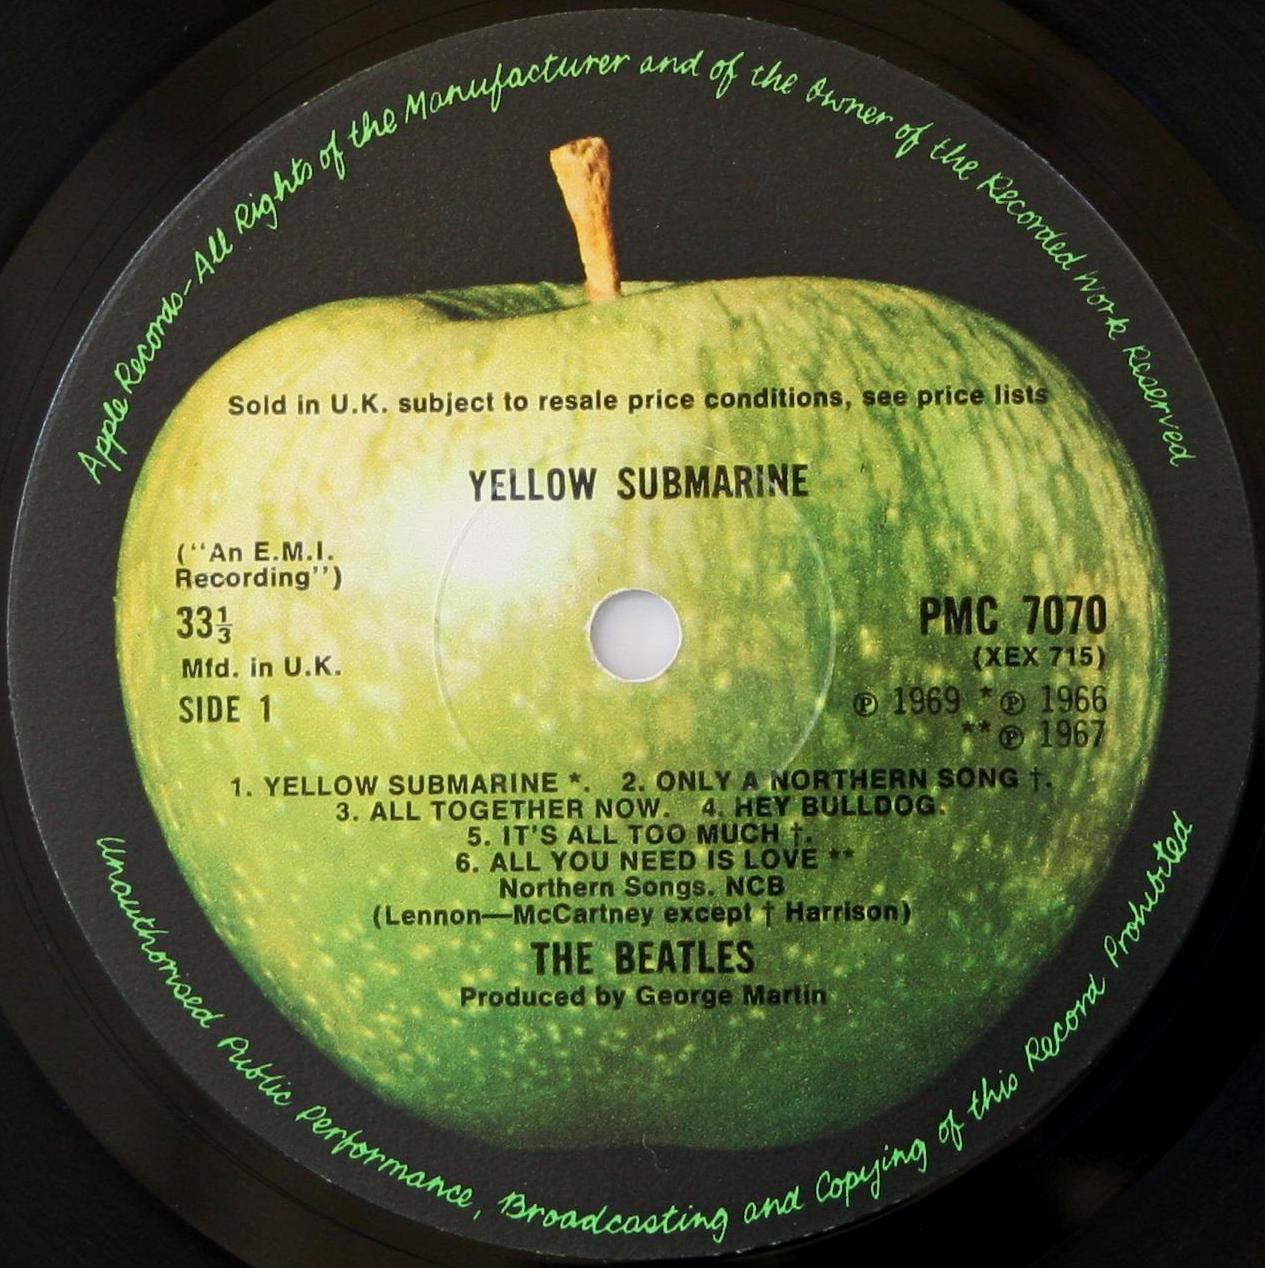 Apple Records Logo - The Beatles Collection » Apple labels.